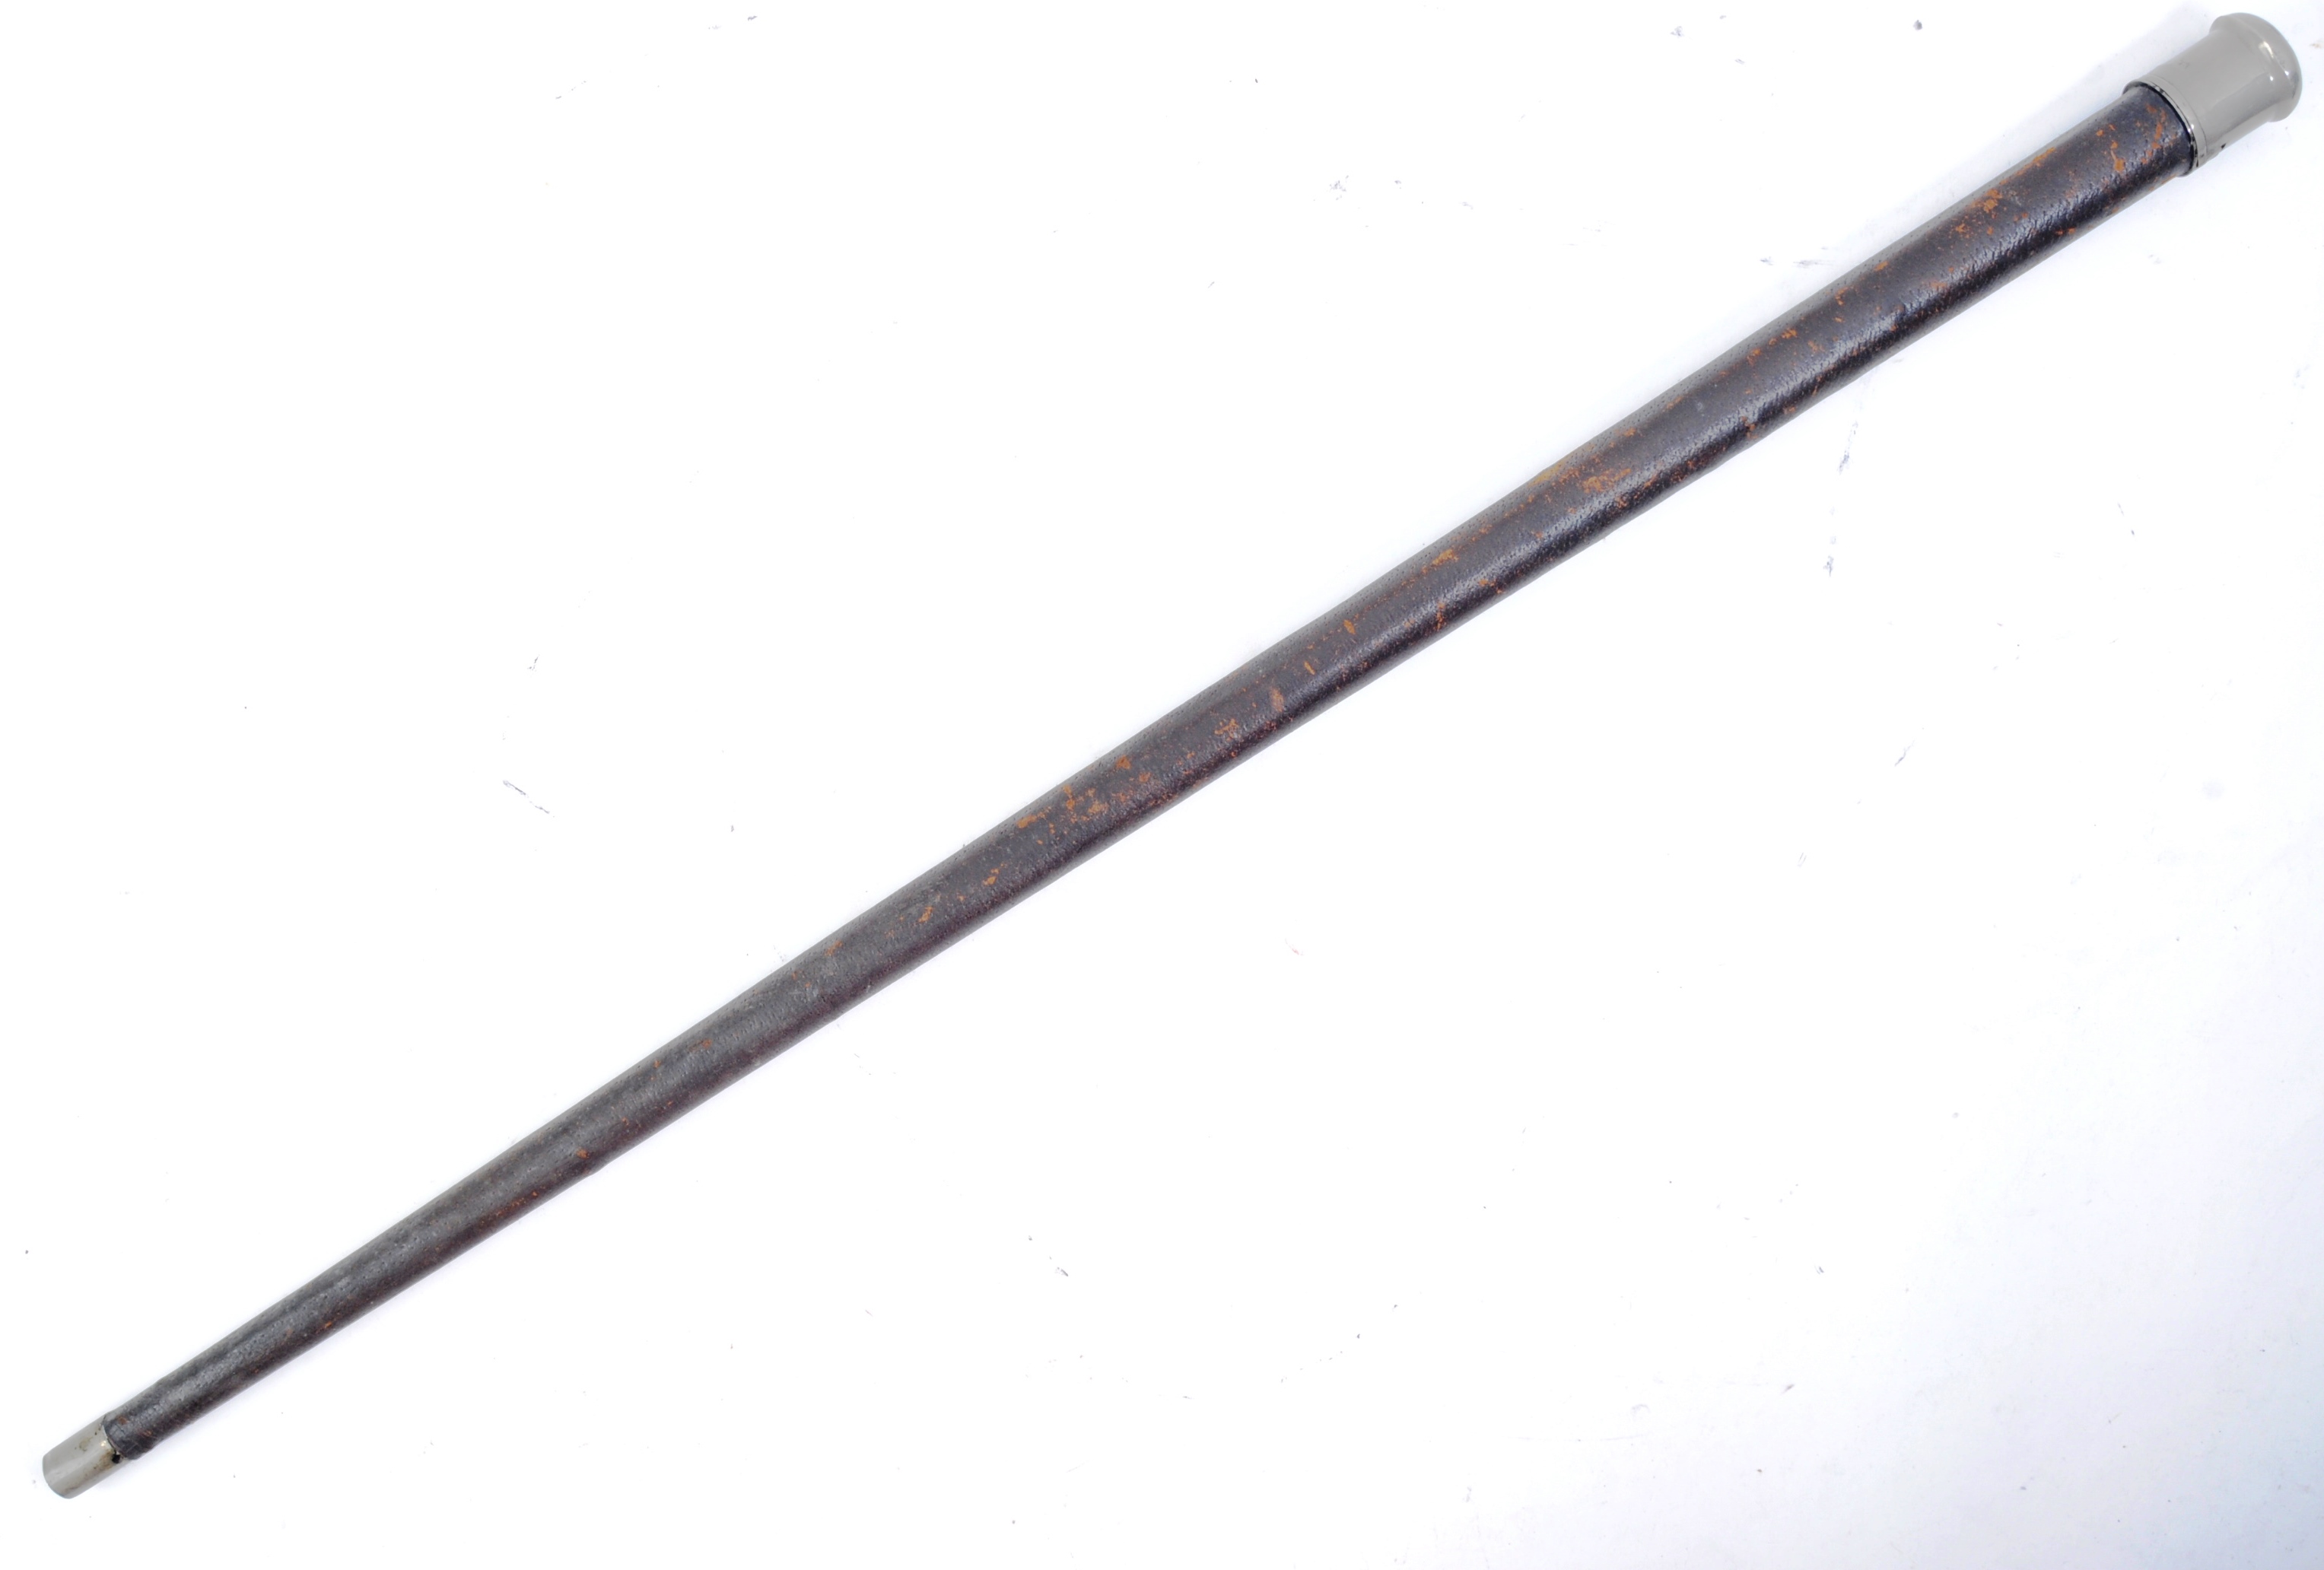 EARLY 20TH MASONIC WALKING CANE WITH CONCEALED SWORD - Image 11 of 11